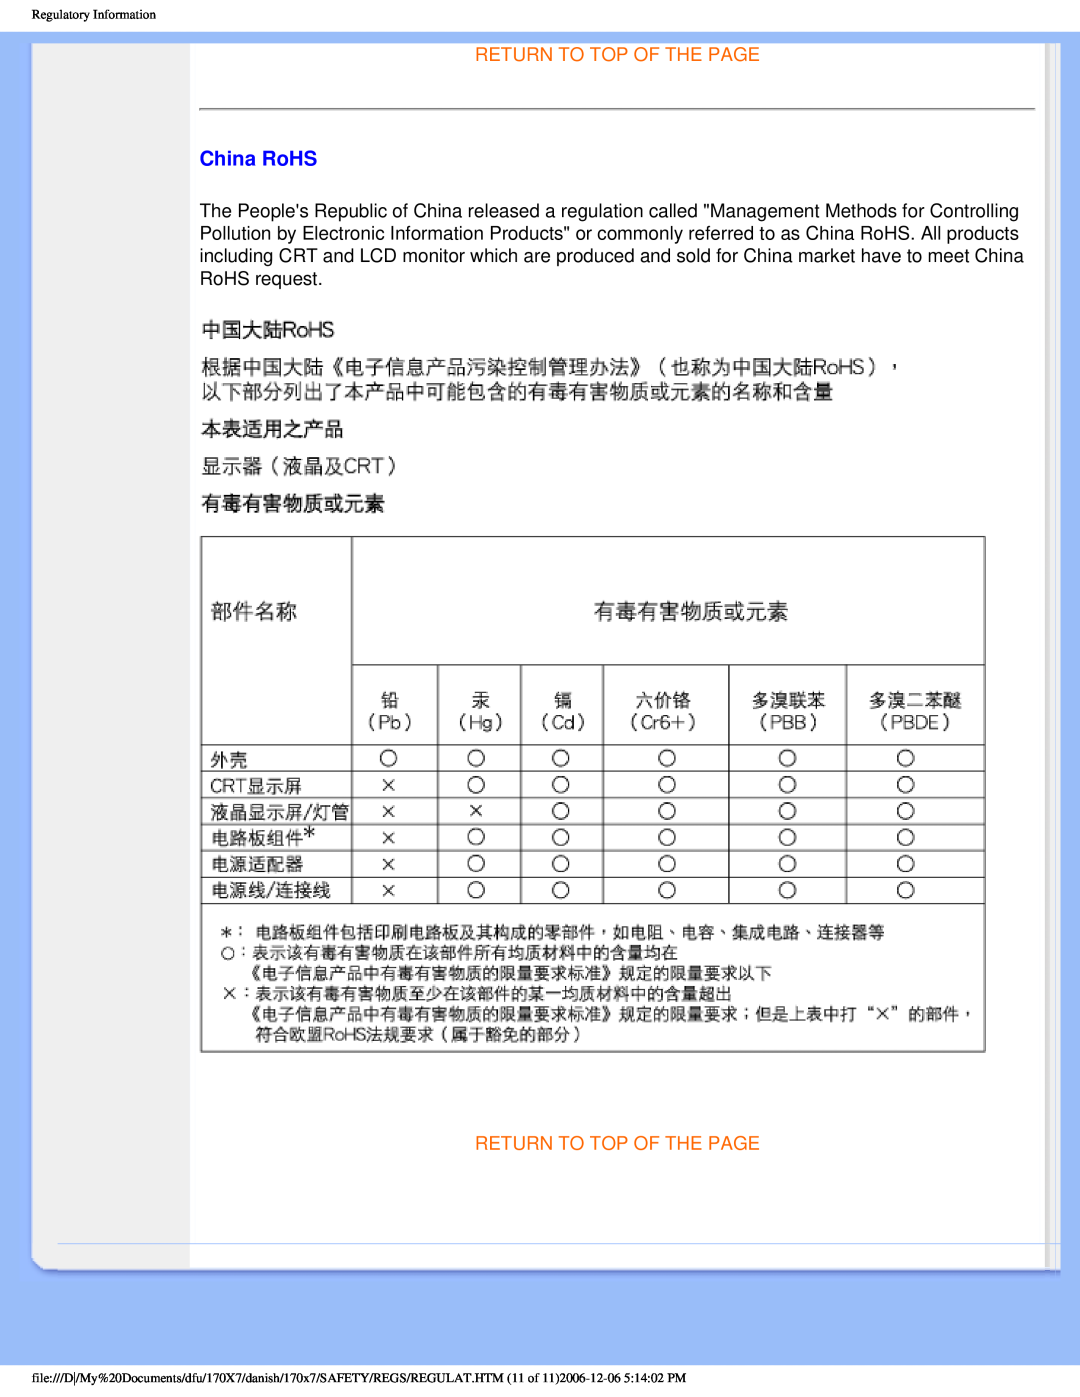 Philips 170x7 user manual China RoHS, Return To Top Of The Page 